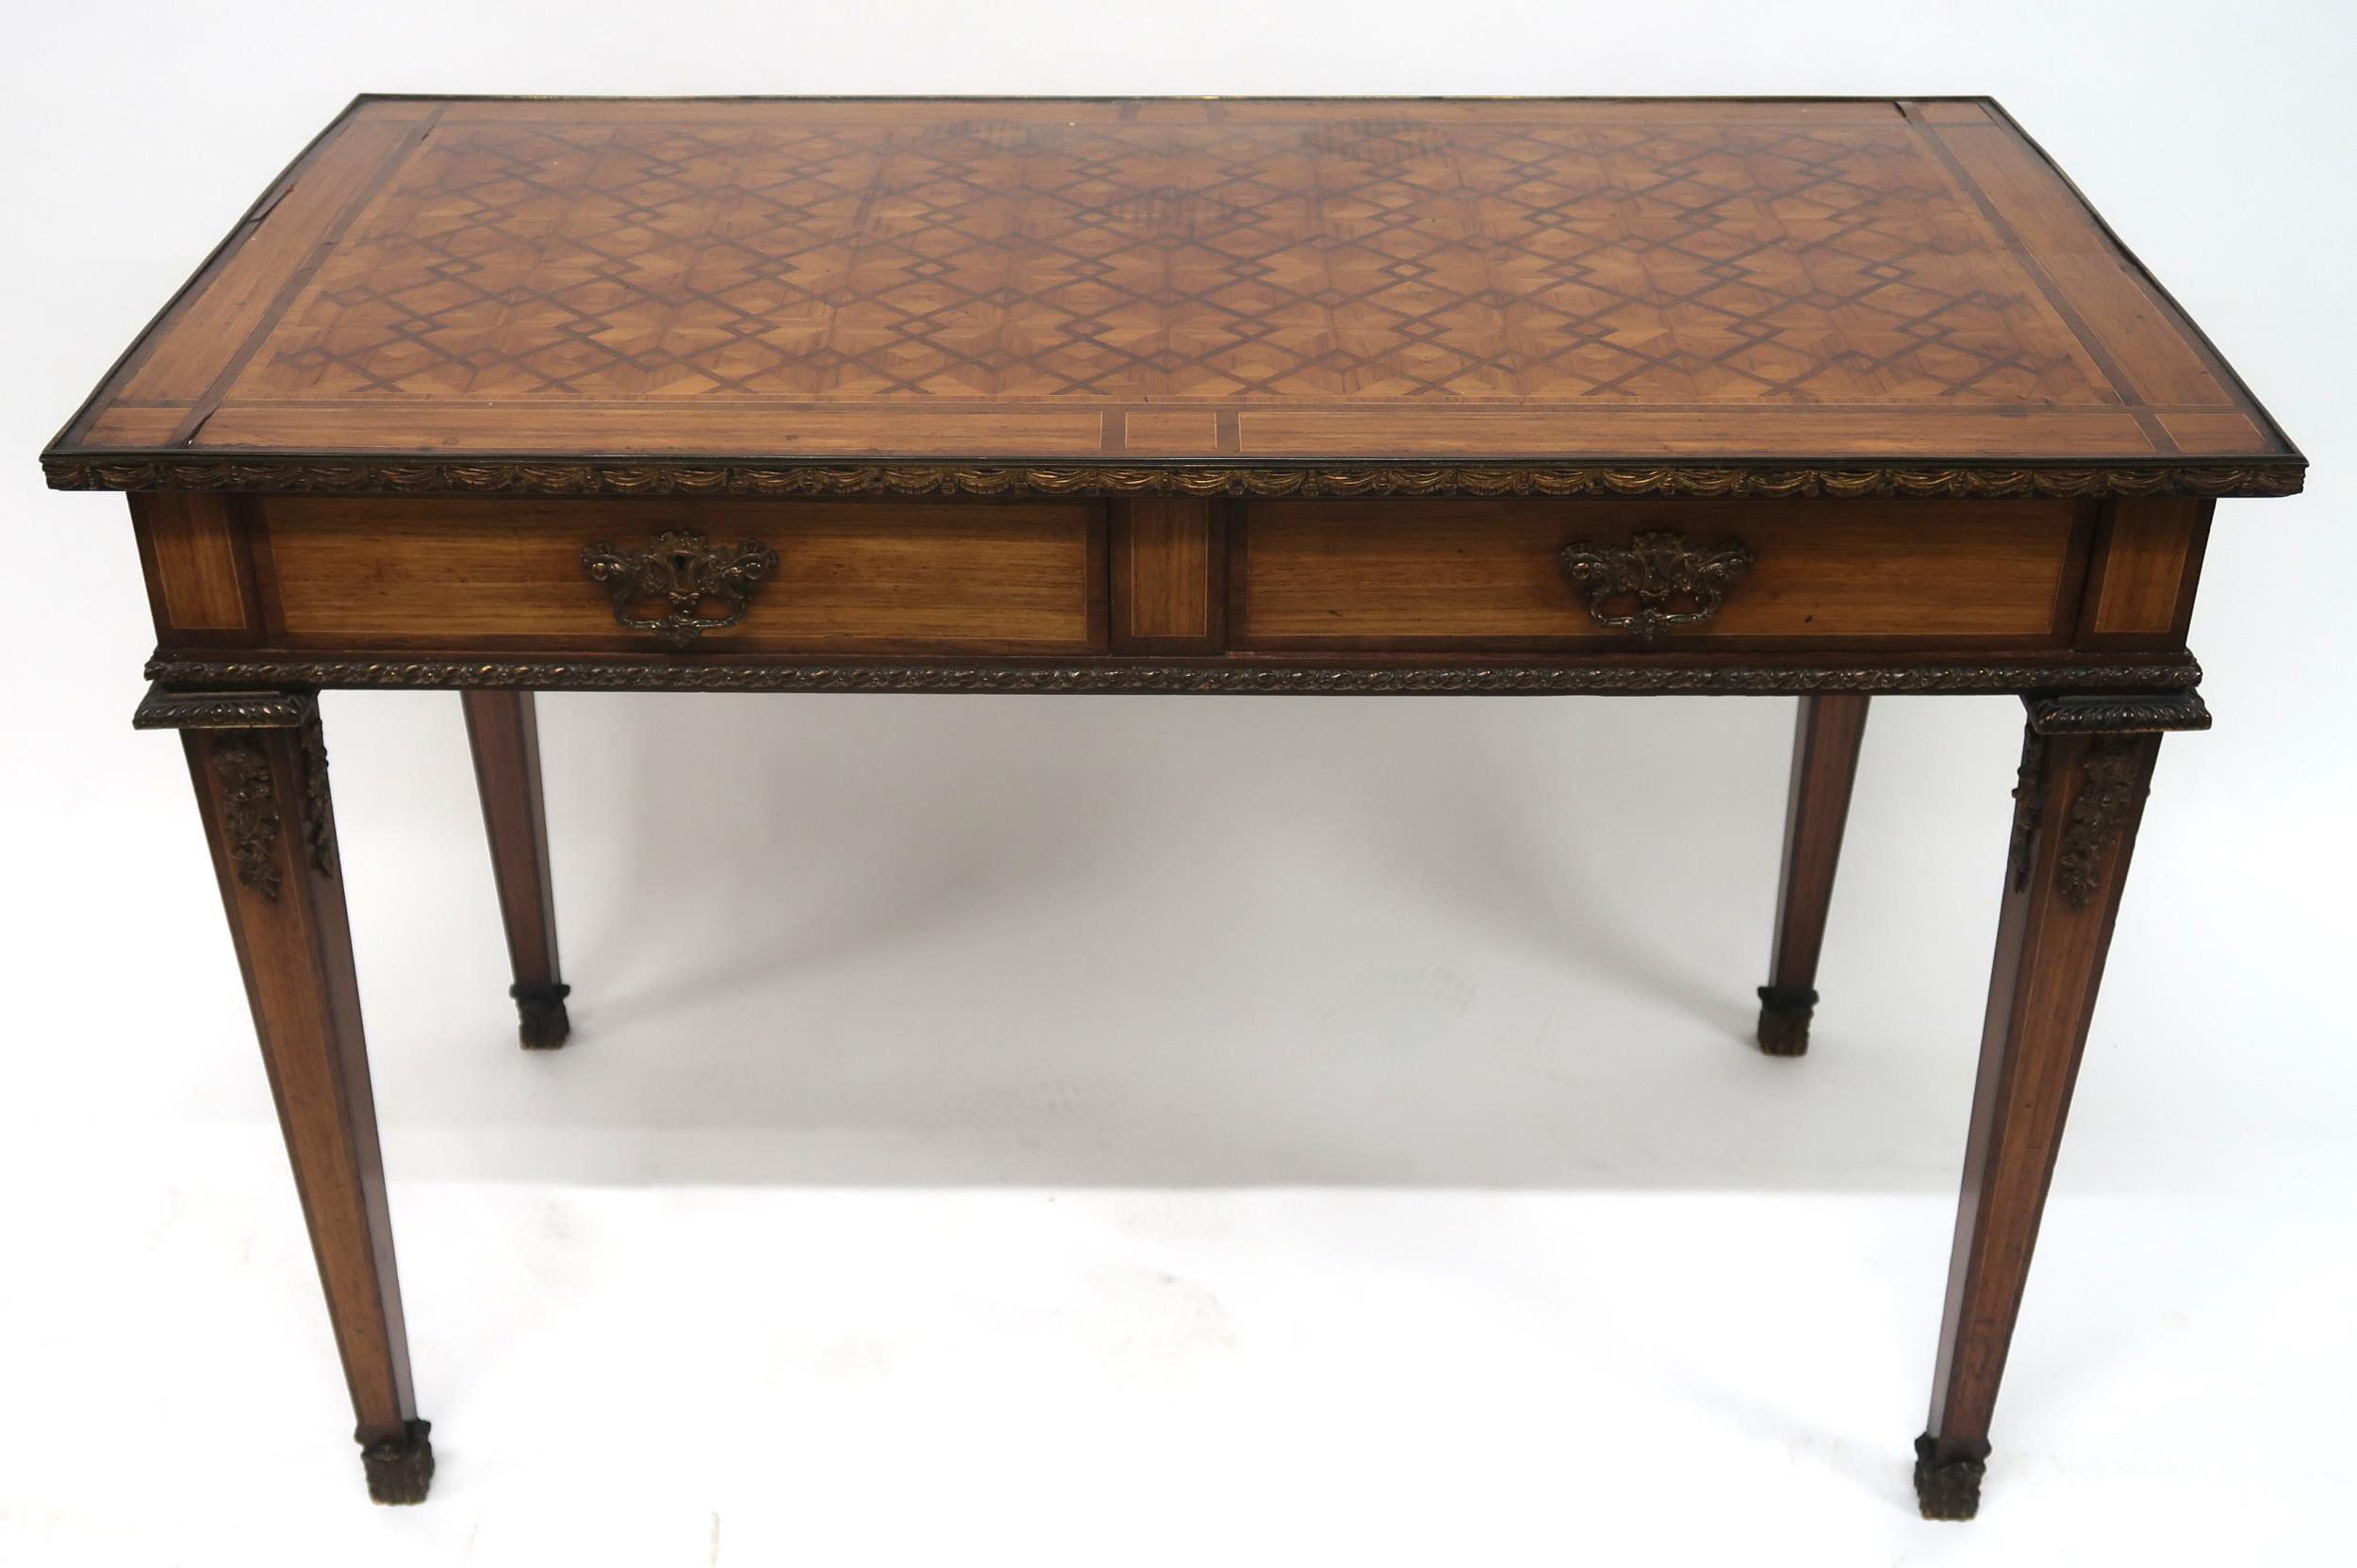 A CONTINENTAL LOUIS XVI STYLE KINGSWOOD BUREAU PLAT with parquetry inlaid top with gilt metal edge